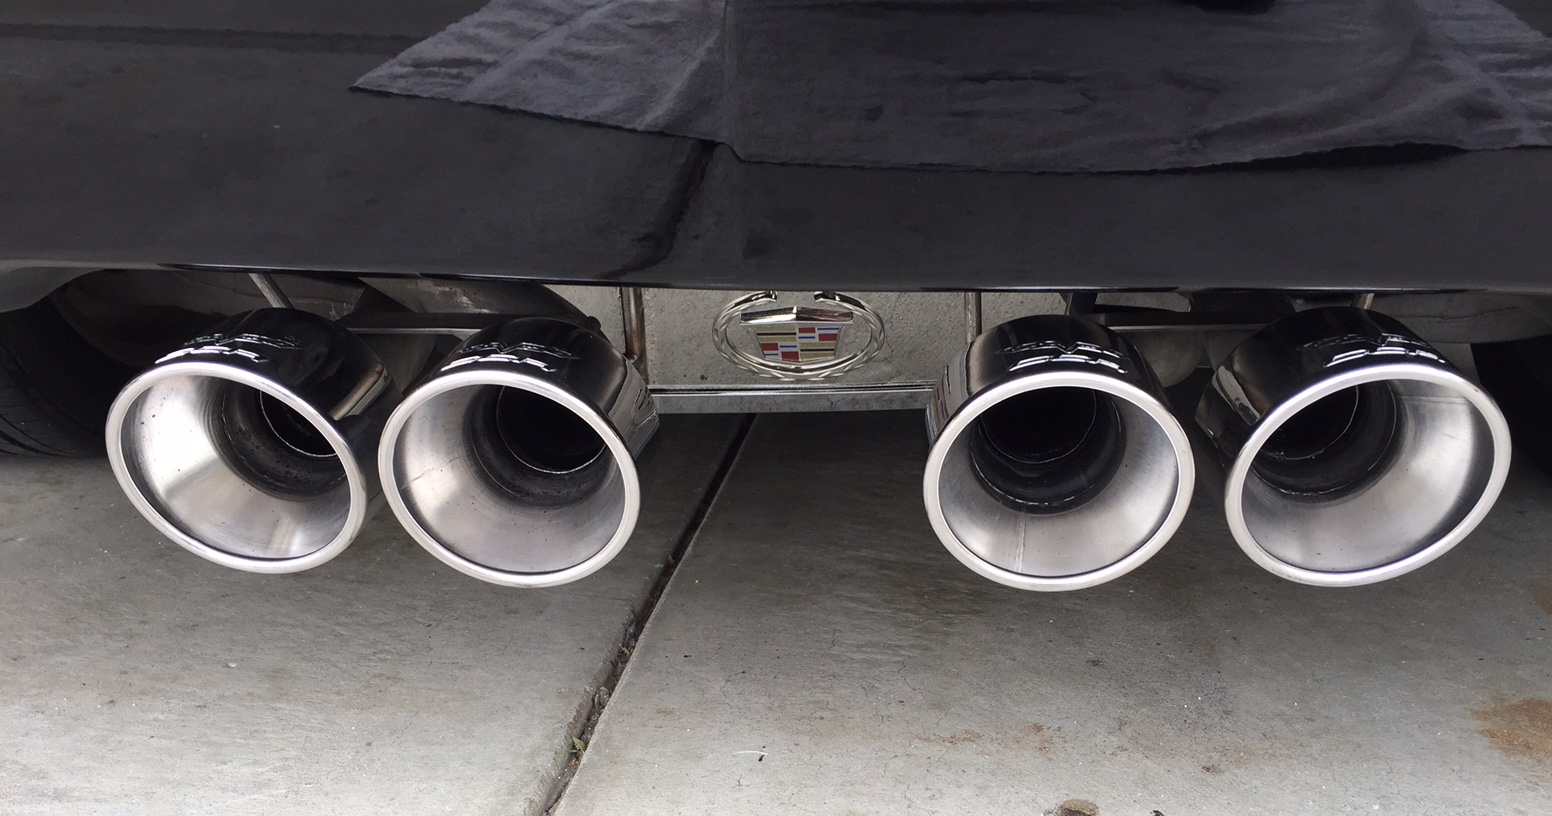 Borla_Exhaust_with_Cadillac_Crest_After_Install_